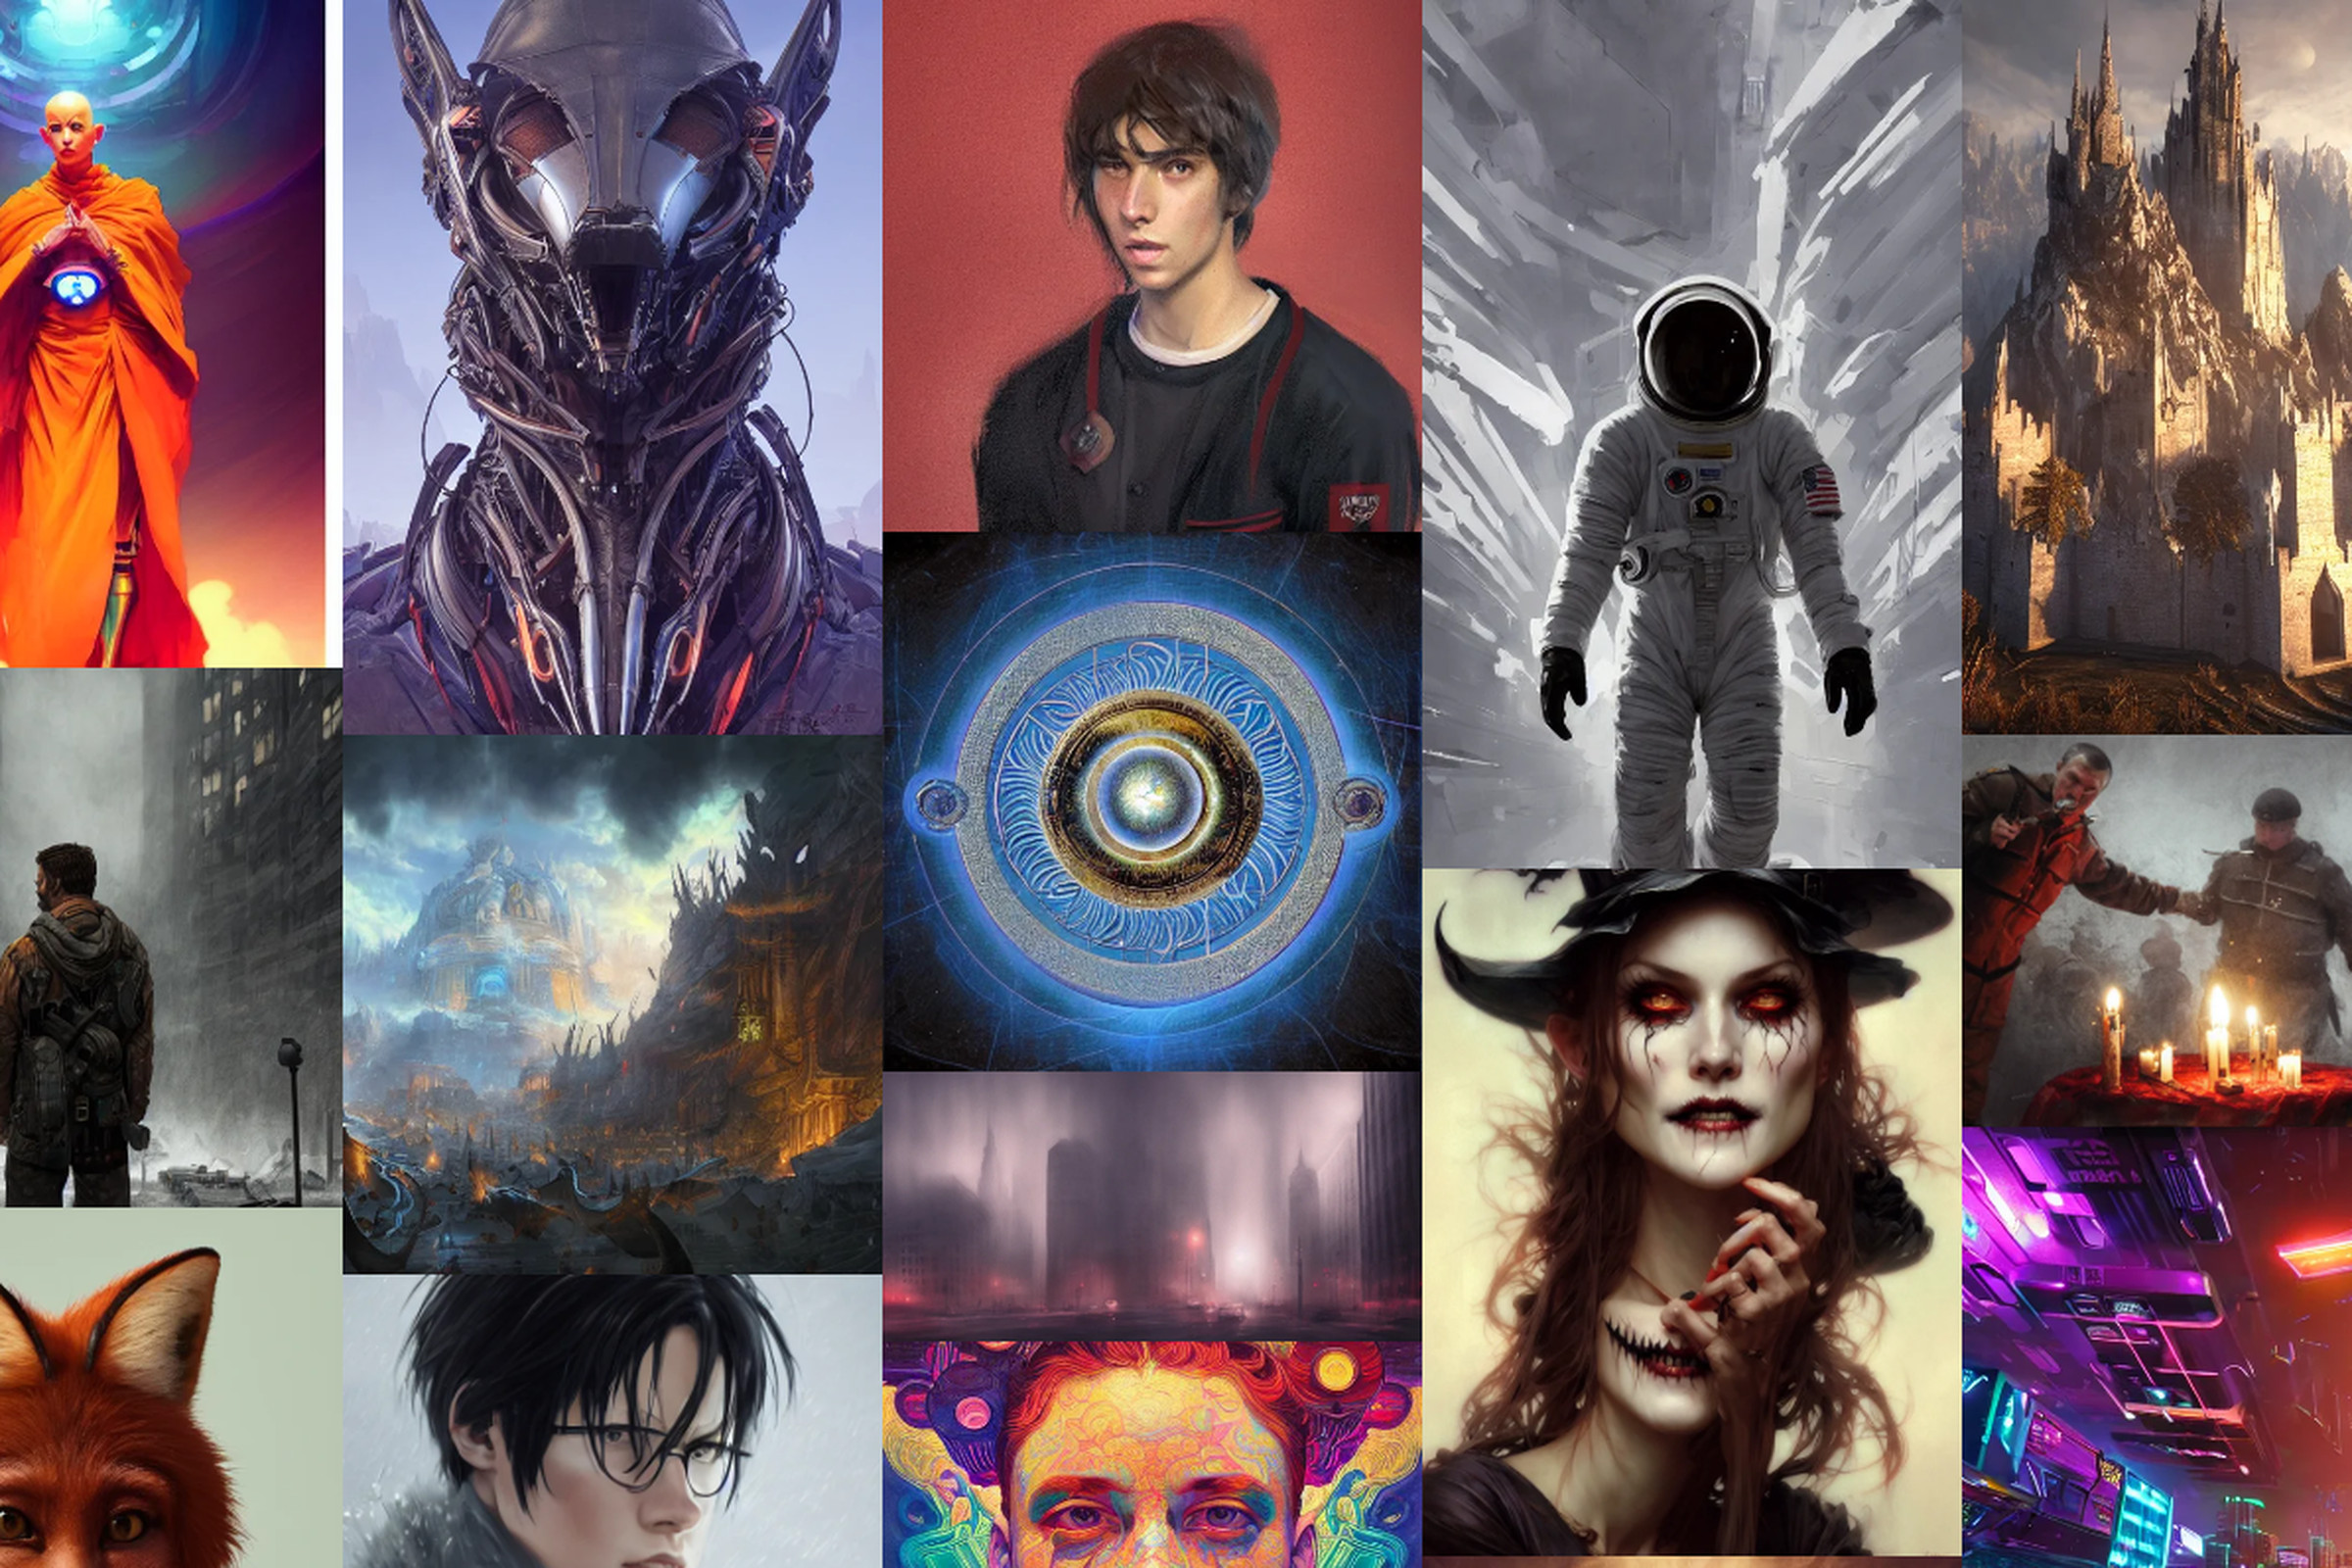 A collage of AI-generated images, including portraits of robots and astronauts; images of castles and occult symbols.